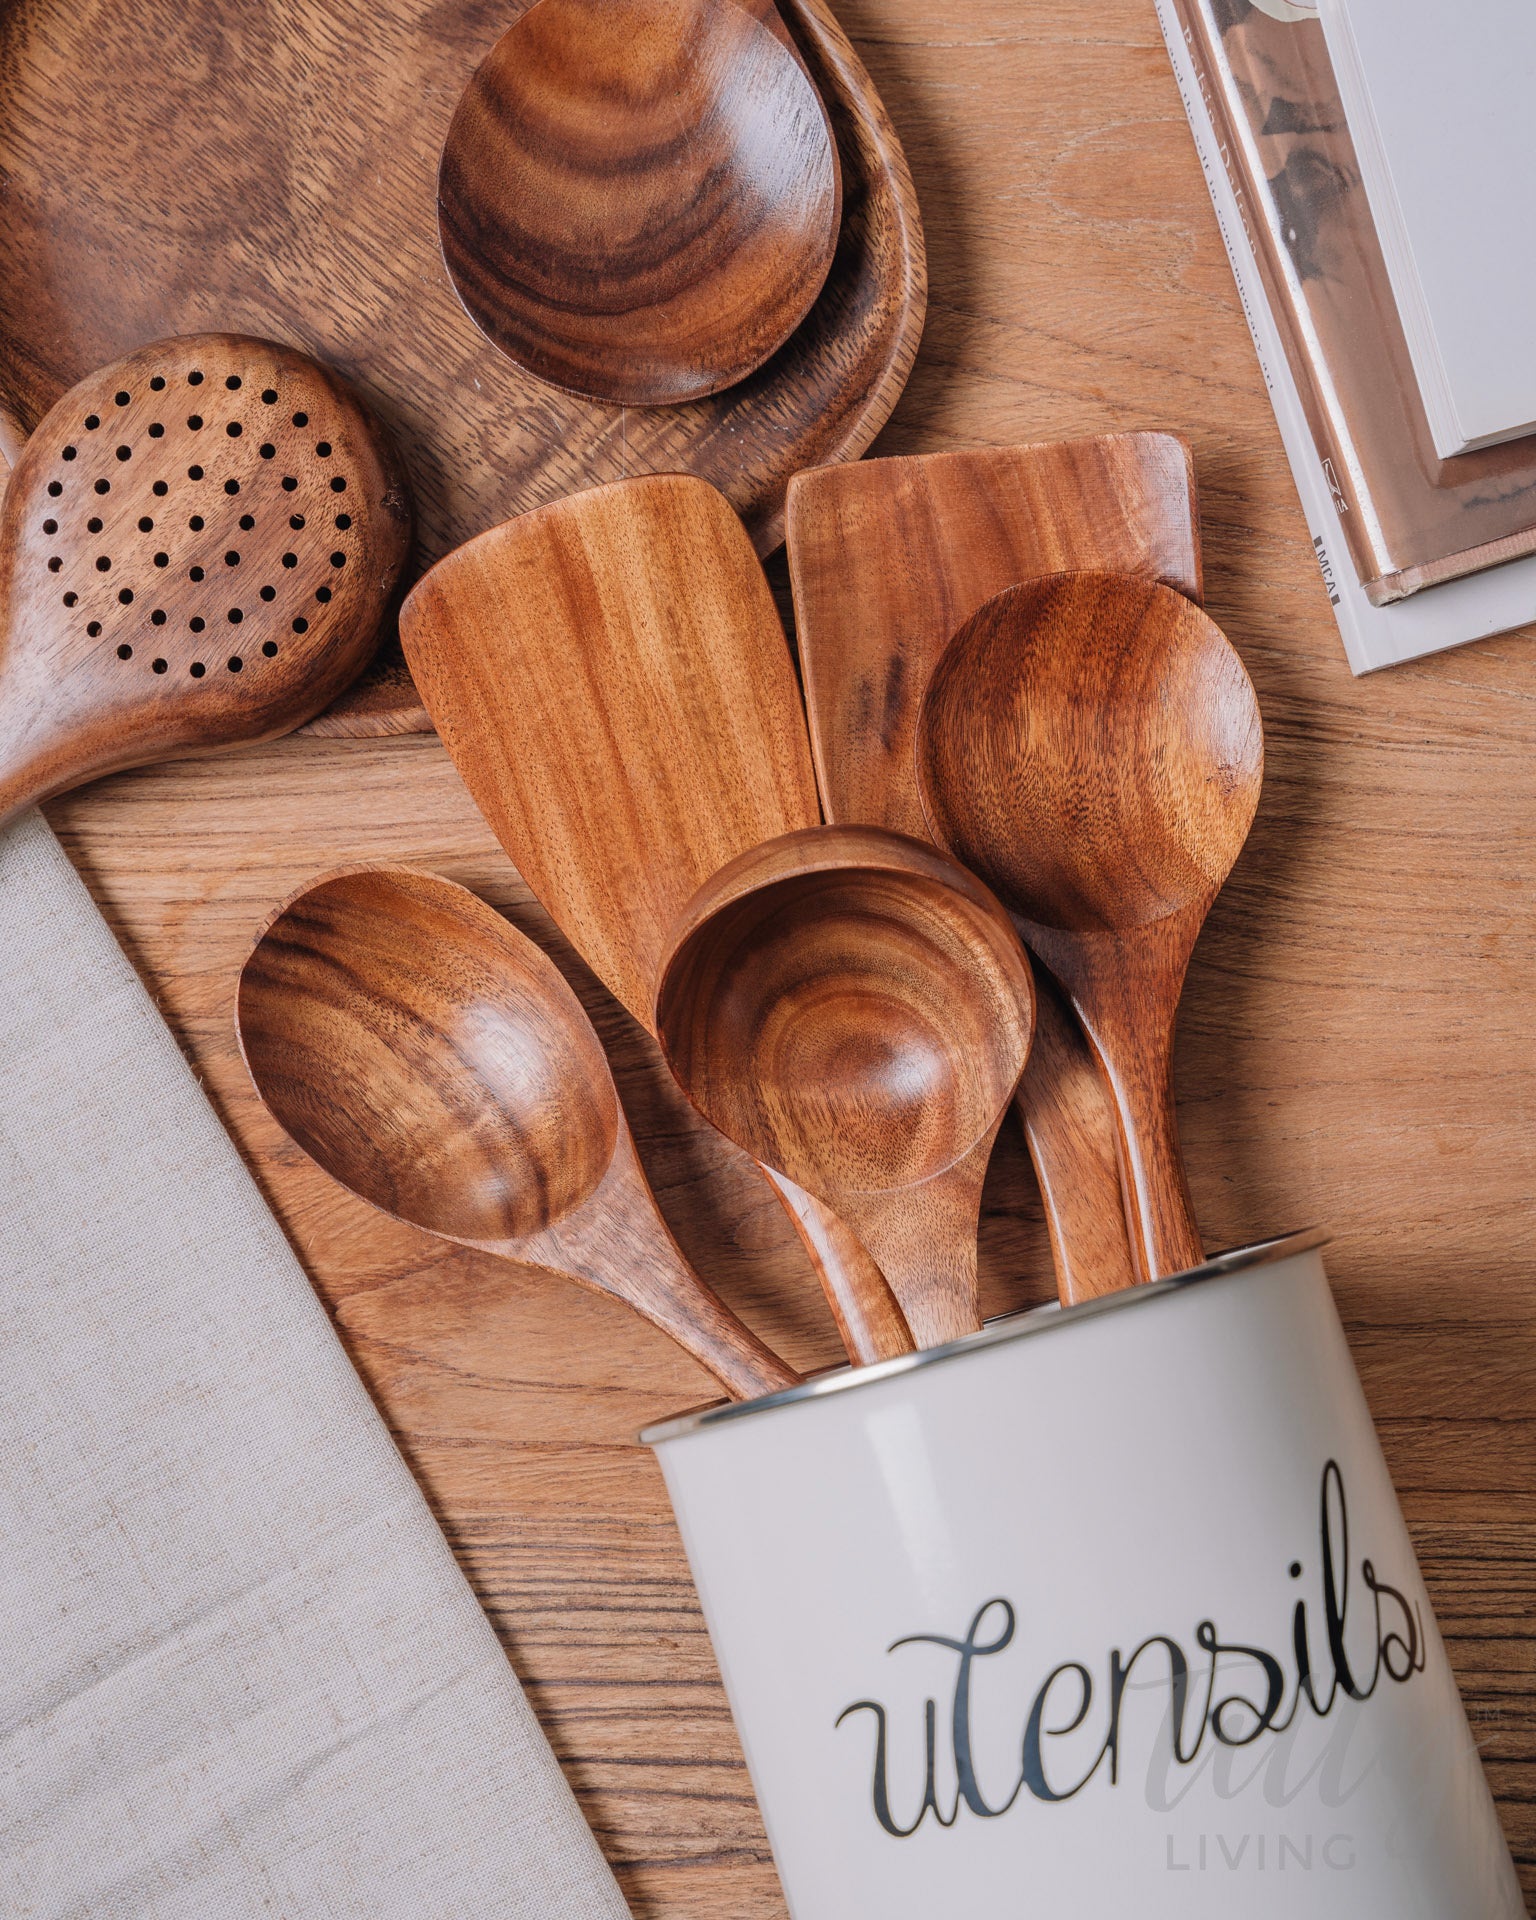 Teak Utensils: Enhancing Your Culinary Experience